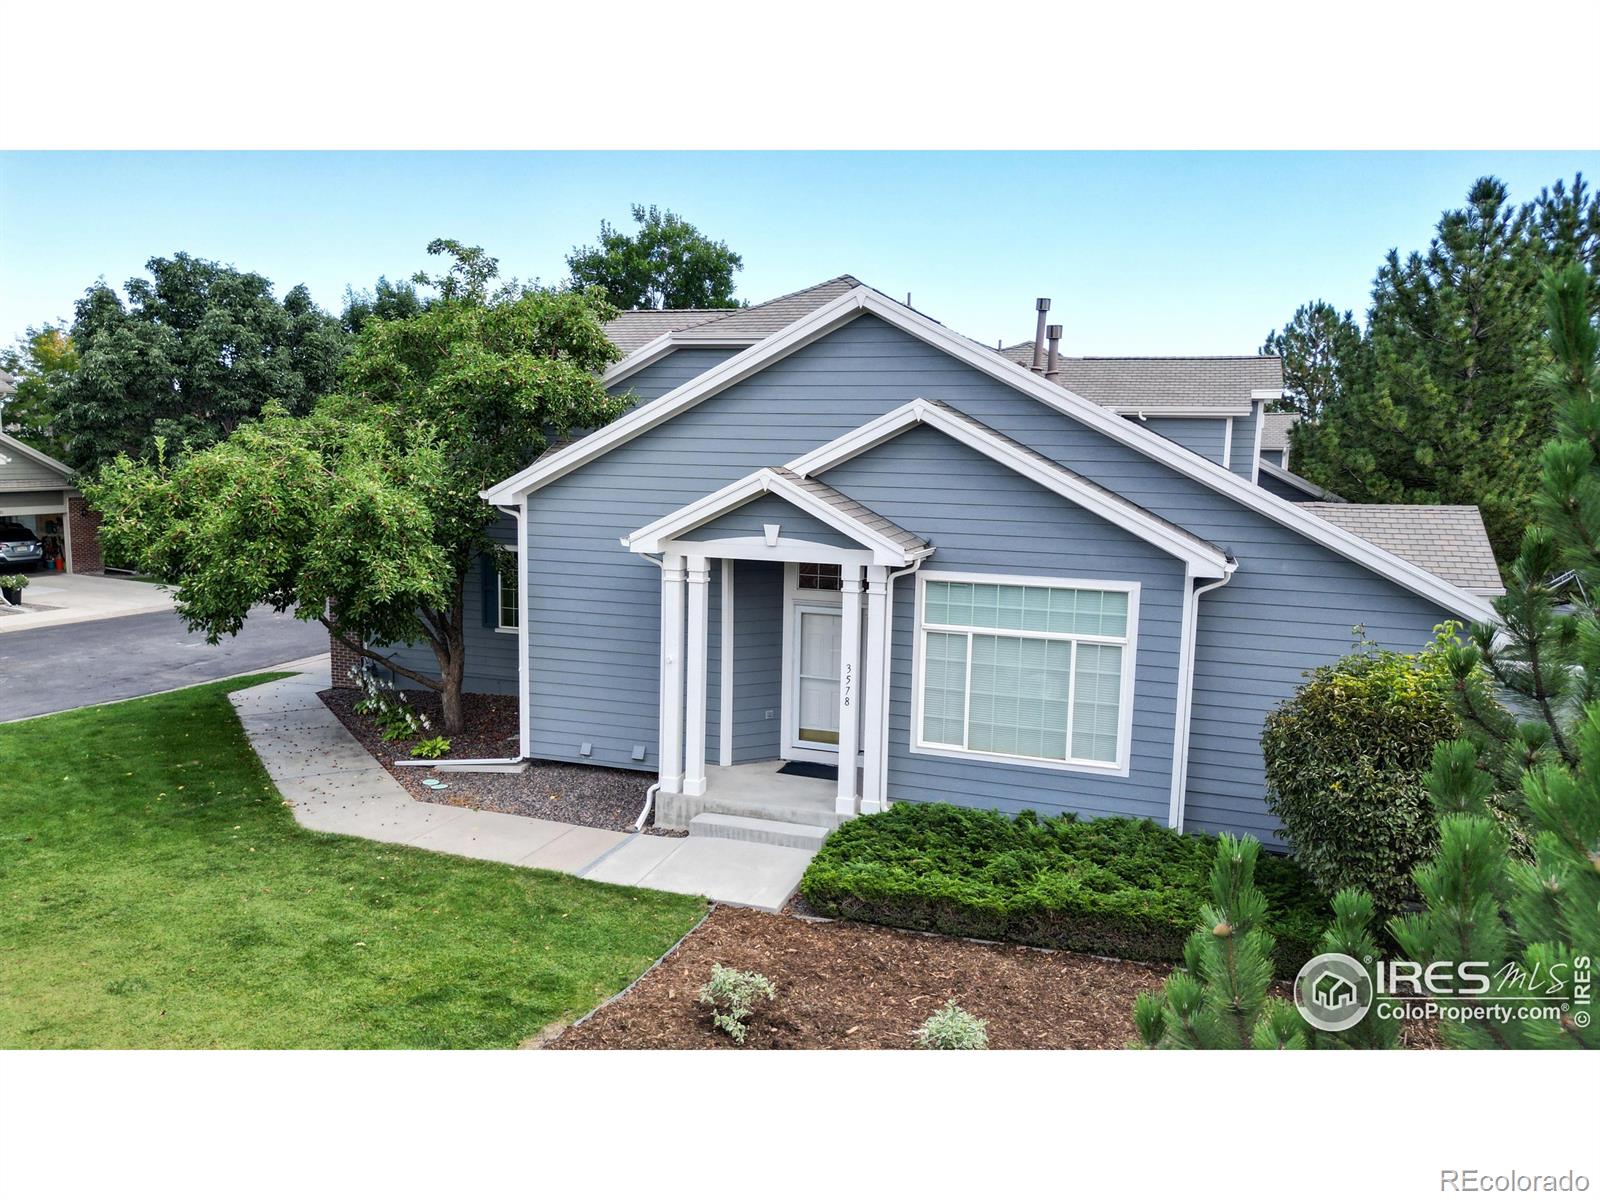 3578 W 126th Place, broomfield MLS: 123456789995878 Beds: 2 Baths: 3 Price: $550,000